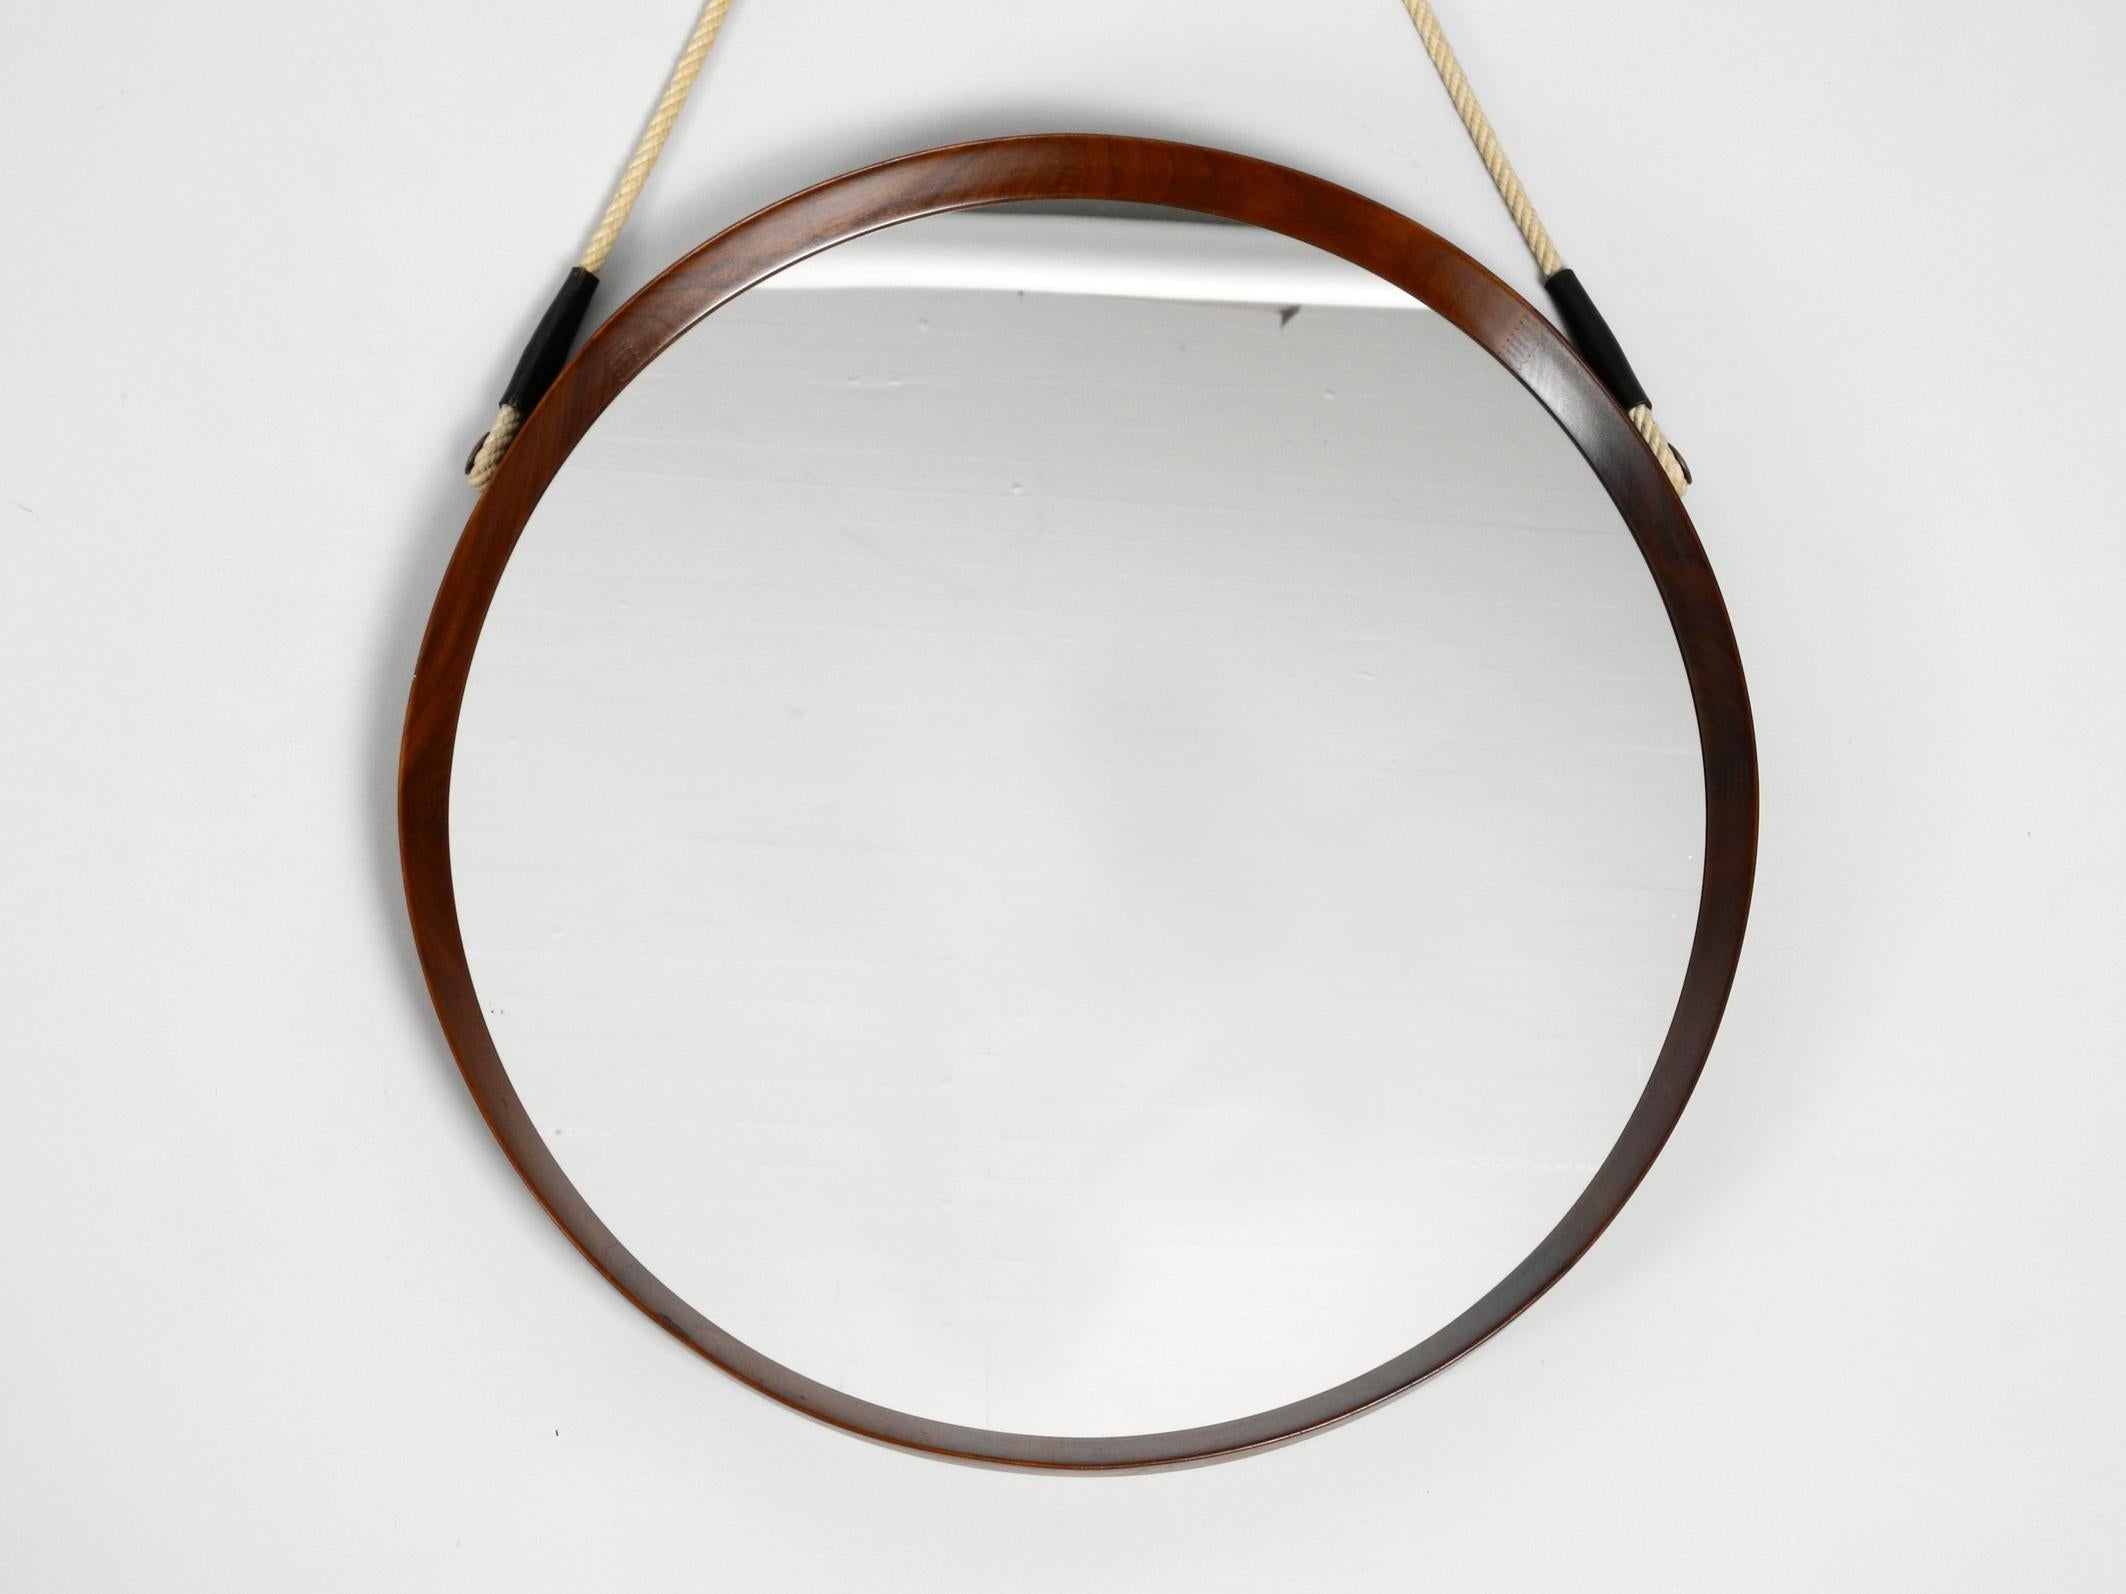 Round original 1960s large beautiful wall mirror with teak frame.
Made in Italy. The original thick rope for hanging is made of jute or sisal.
It is undamaged and firm.
Very high quality workmanship in a Minimalist Italian design.
100% original